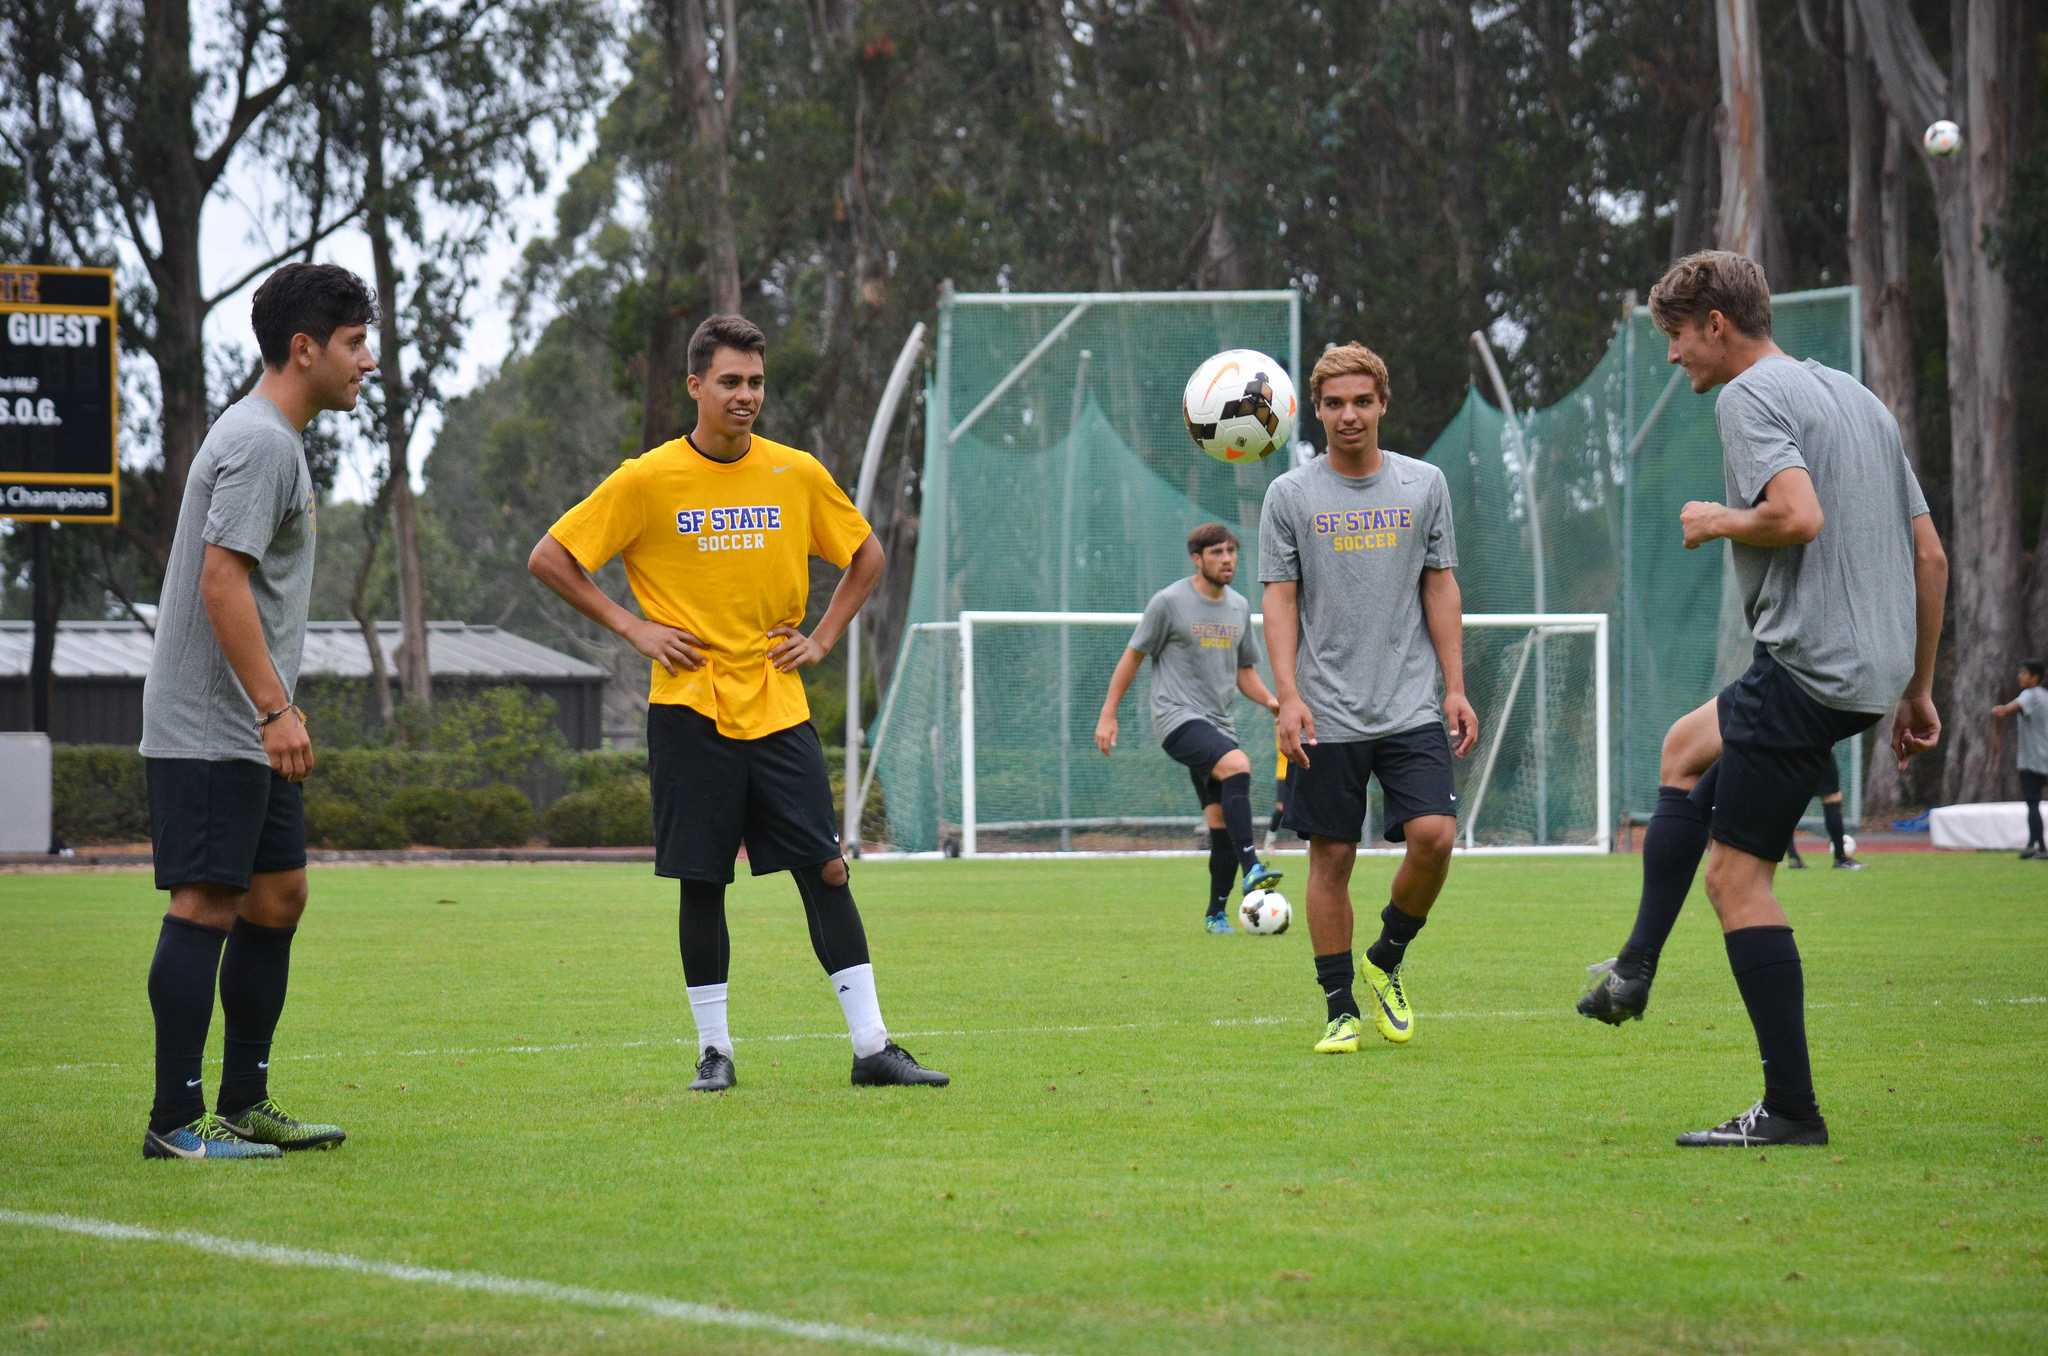 Members of the SF State mens soccer team pass the soccer ball around during practice at Cox Stadium Friday, August 21. (Melissa Minton / Xpress)